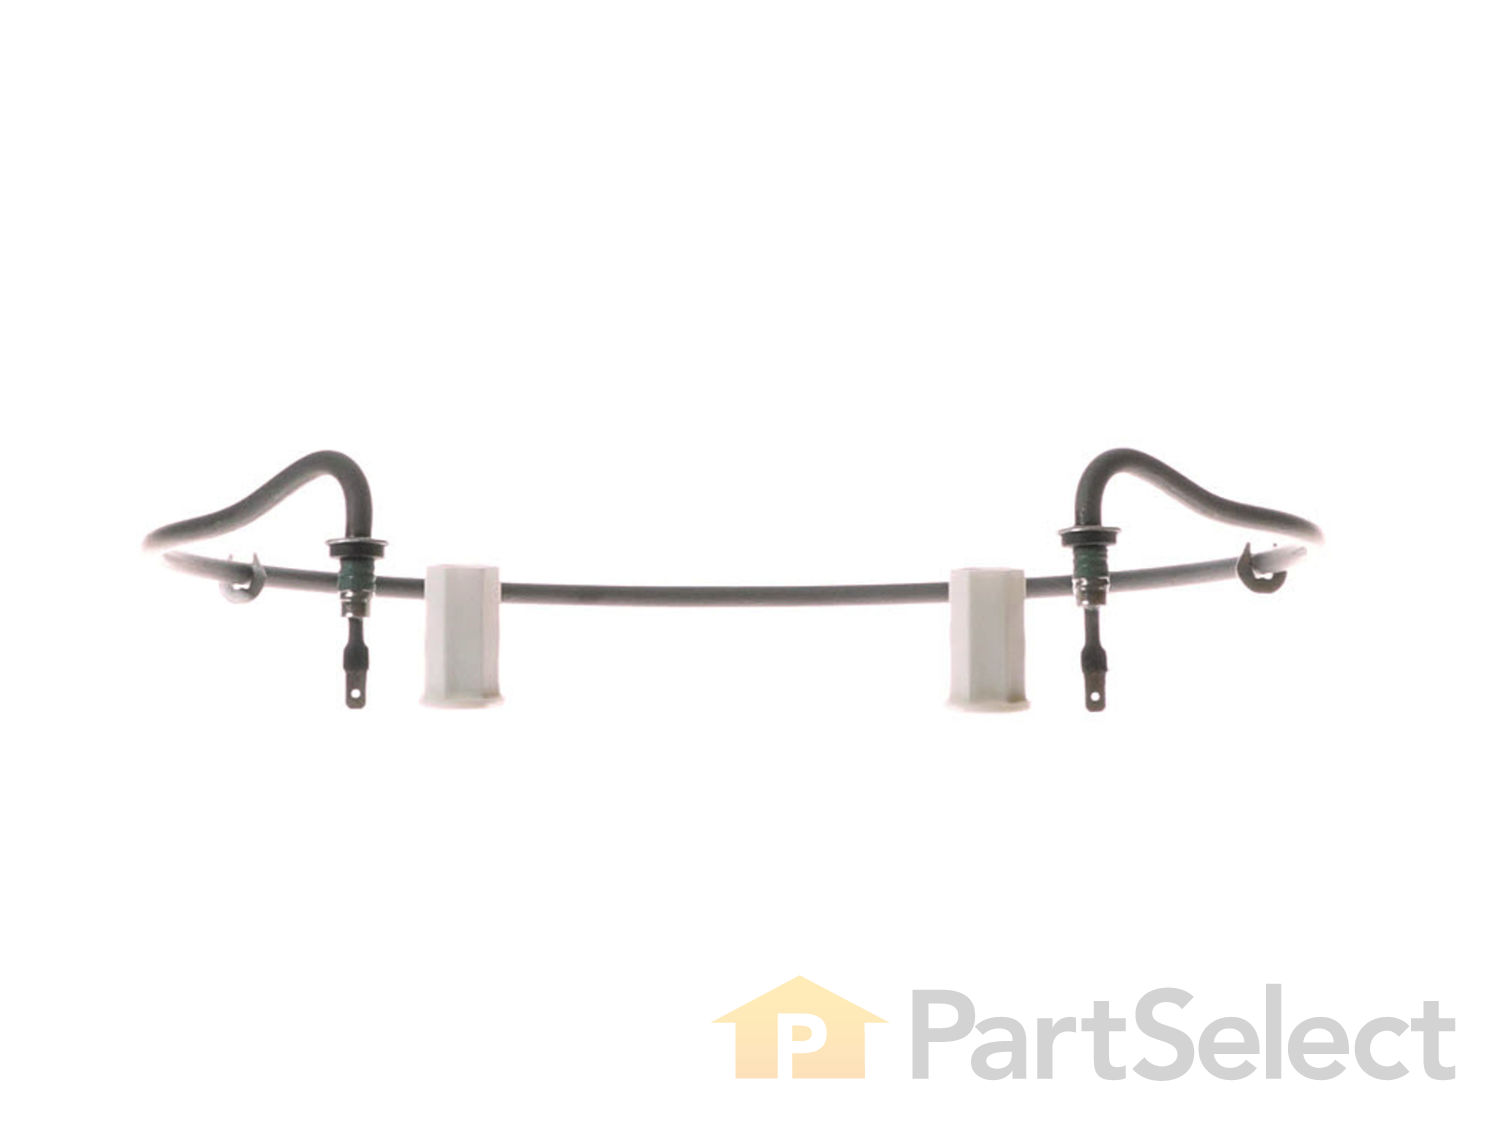 Whirlpool W10703867 Dishwasher Heating Element for sale online 